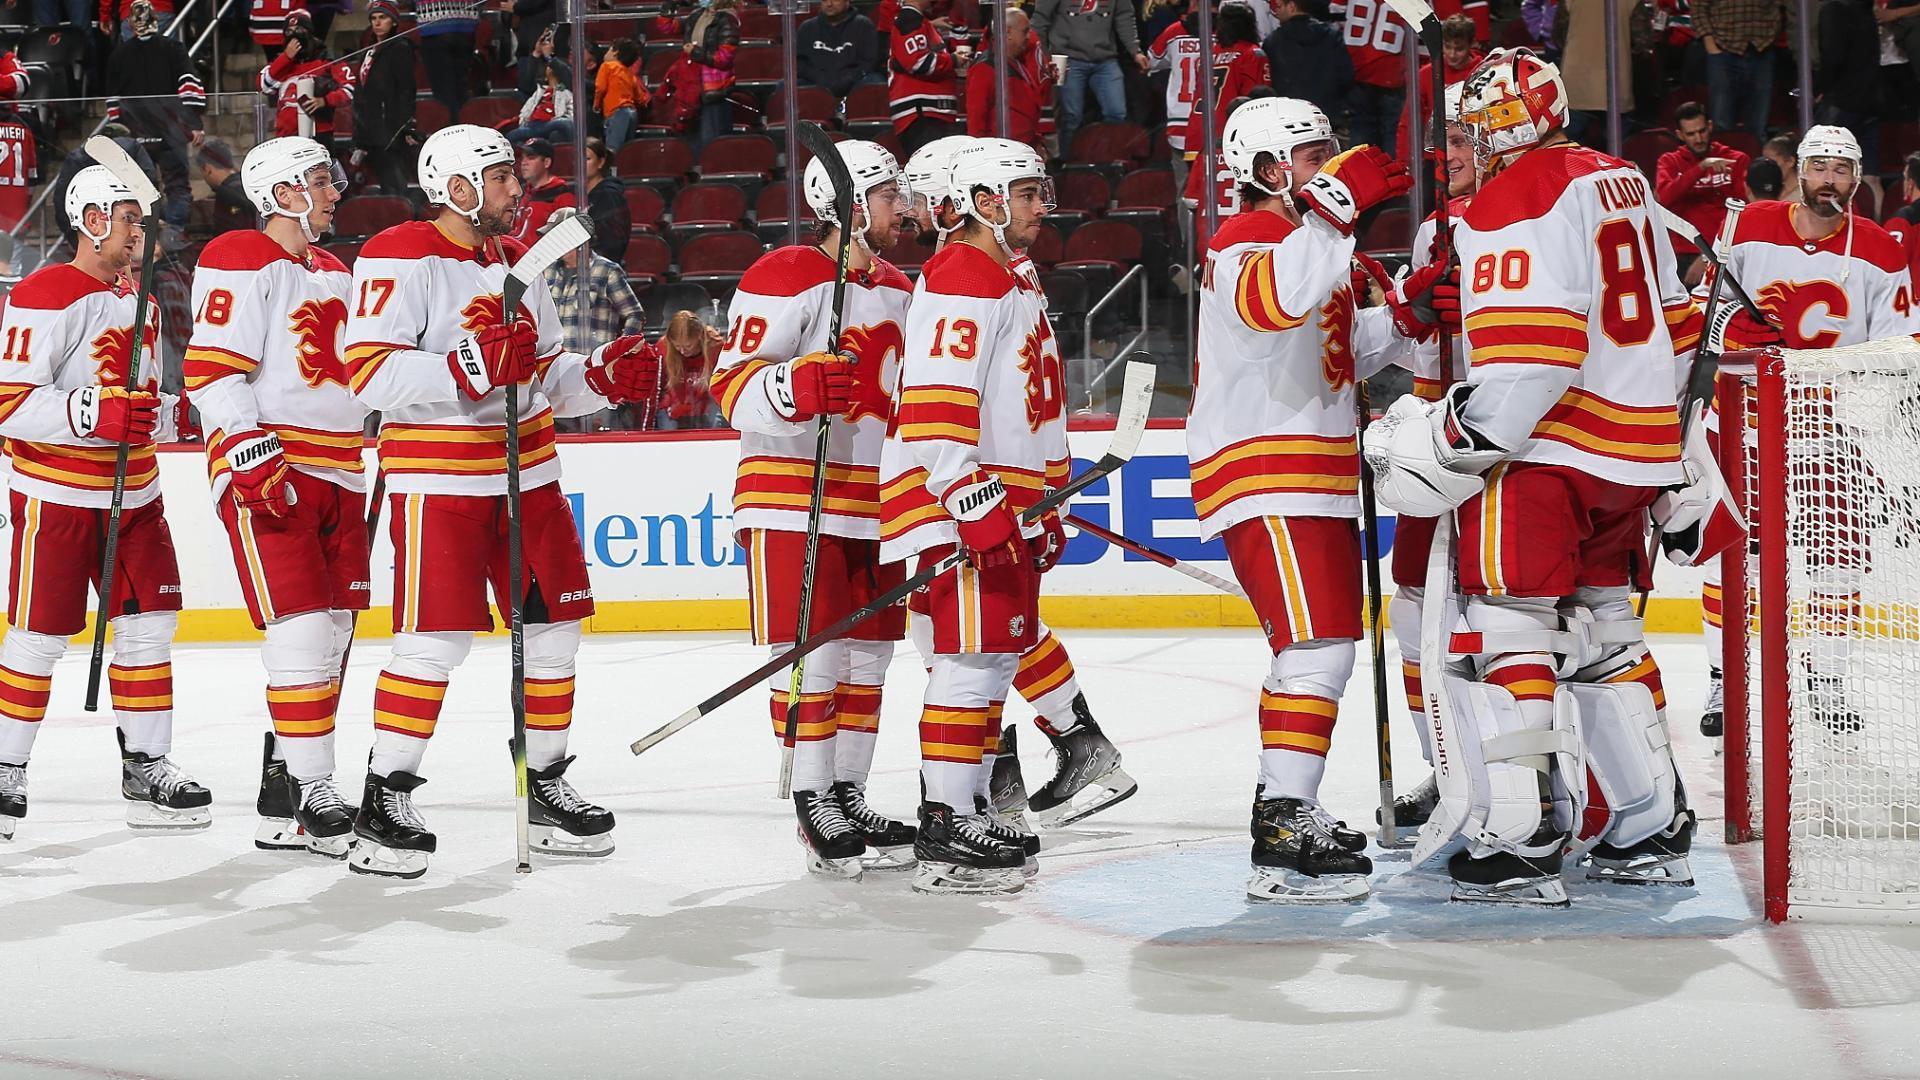 Flames use 4-goal outburst in 1st period to beat Devils 5-3